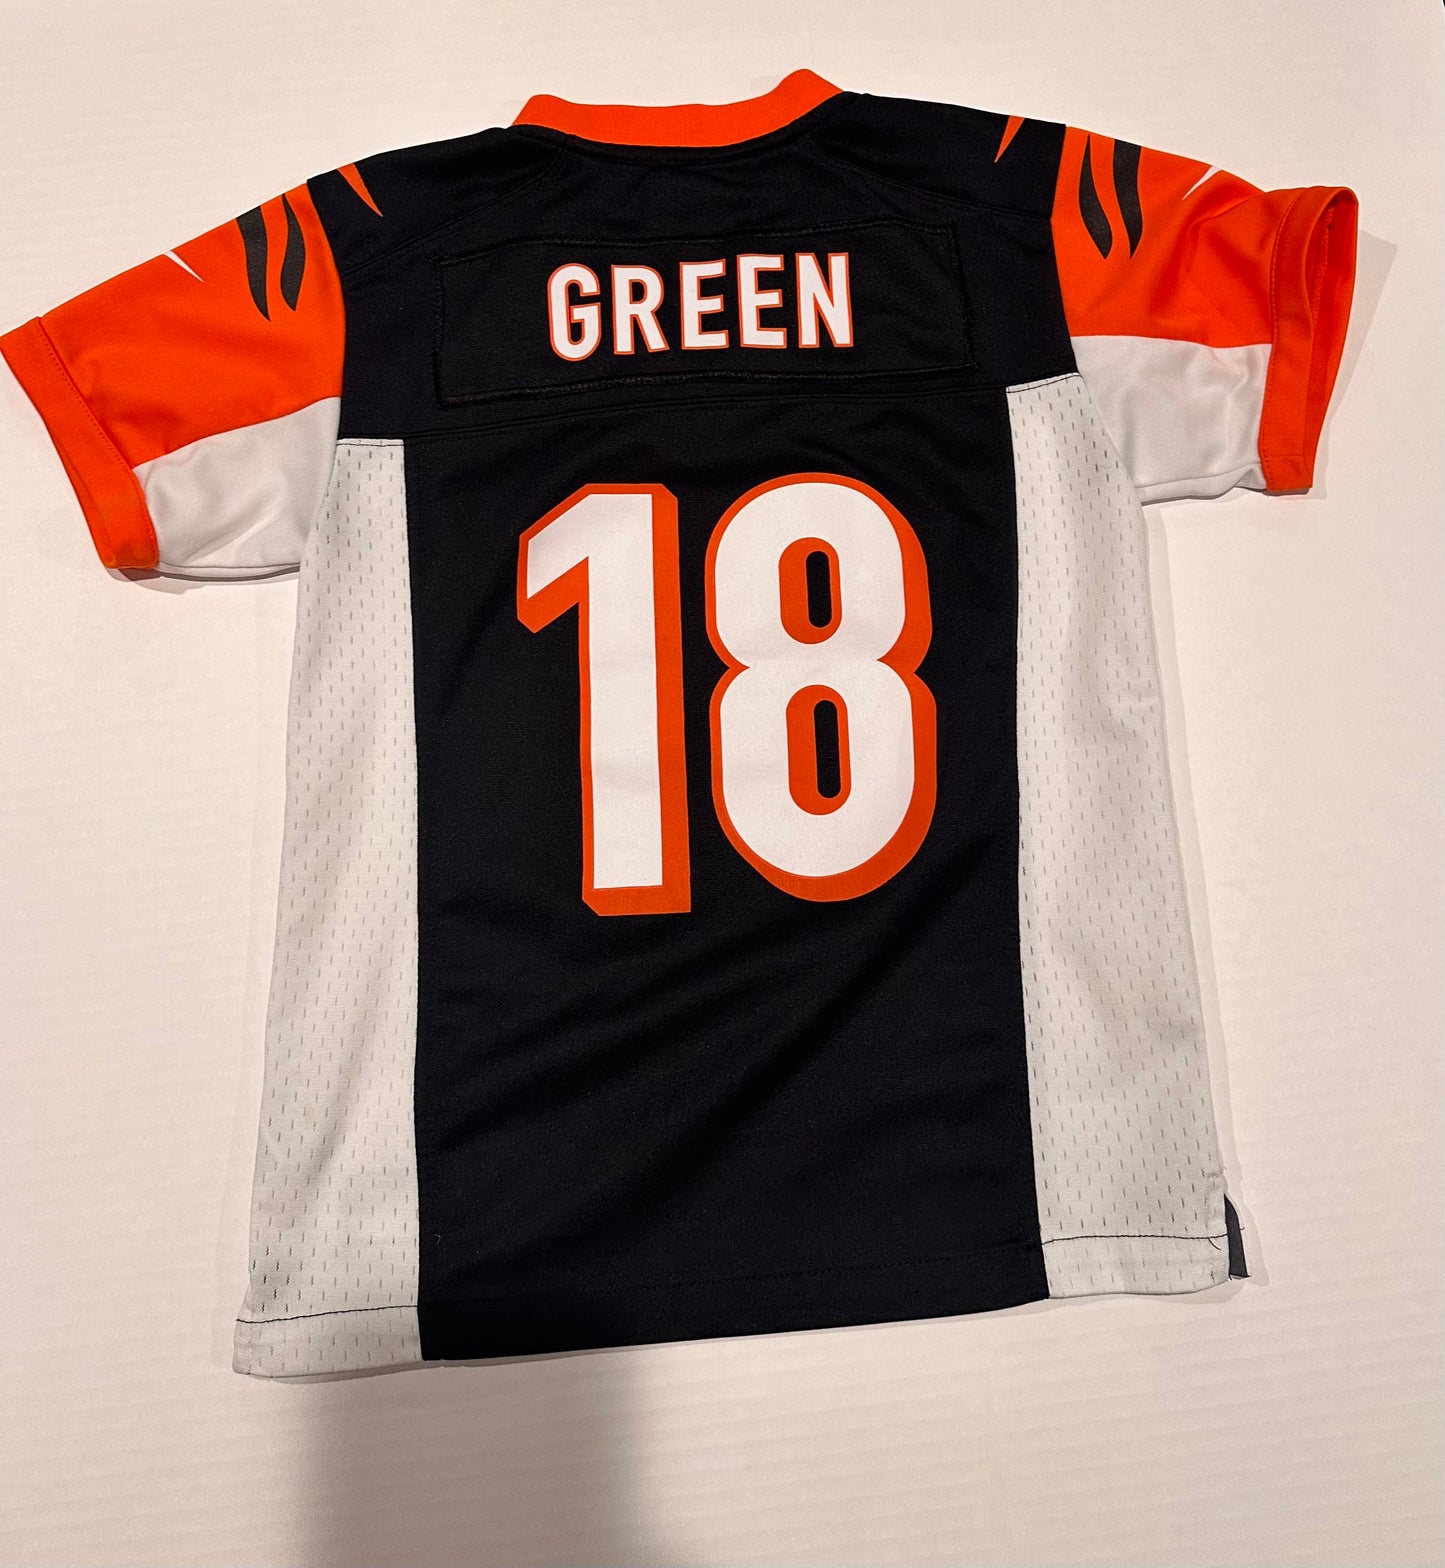 Youth Nike  Official Bengals jersey AJ Green number 18 size small